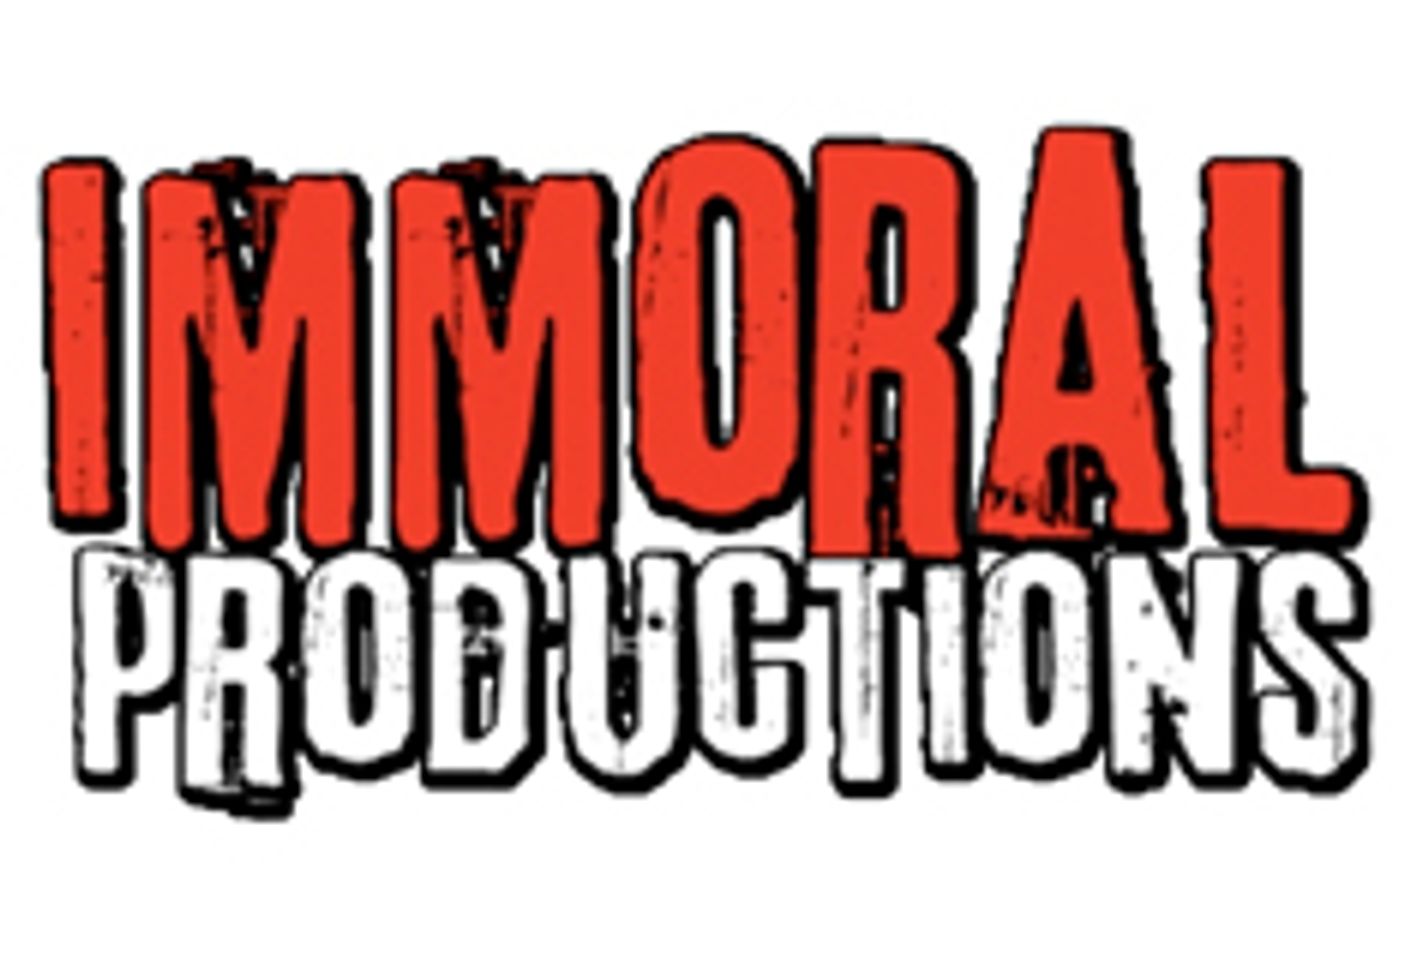 Immoral Productions Earns Attention for Streamate World Cup Shows